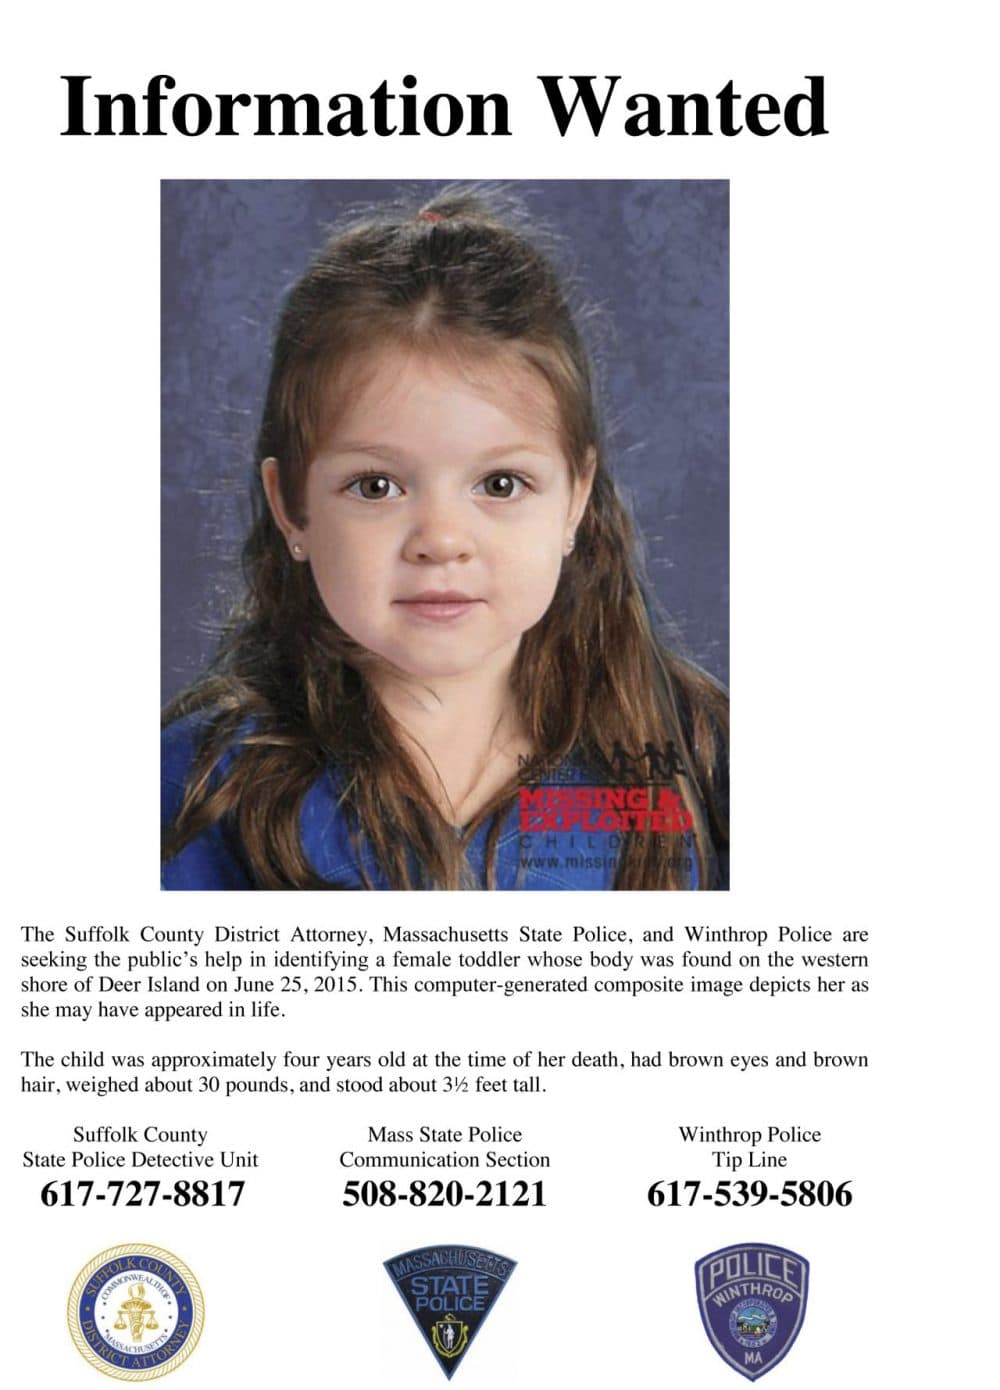 Flyer released July 2015 by the Suffolk County Massachusetts District Attorney includes a computer-generated composite image depicting the possible likeness of a young girl whose body was found on the shore of Deer Island in Boston Harbor in June. (Suffolk County District Attorney via AP, File)